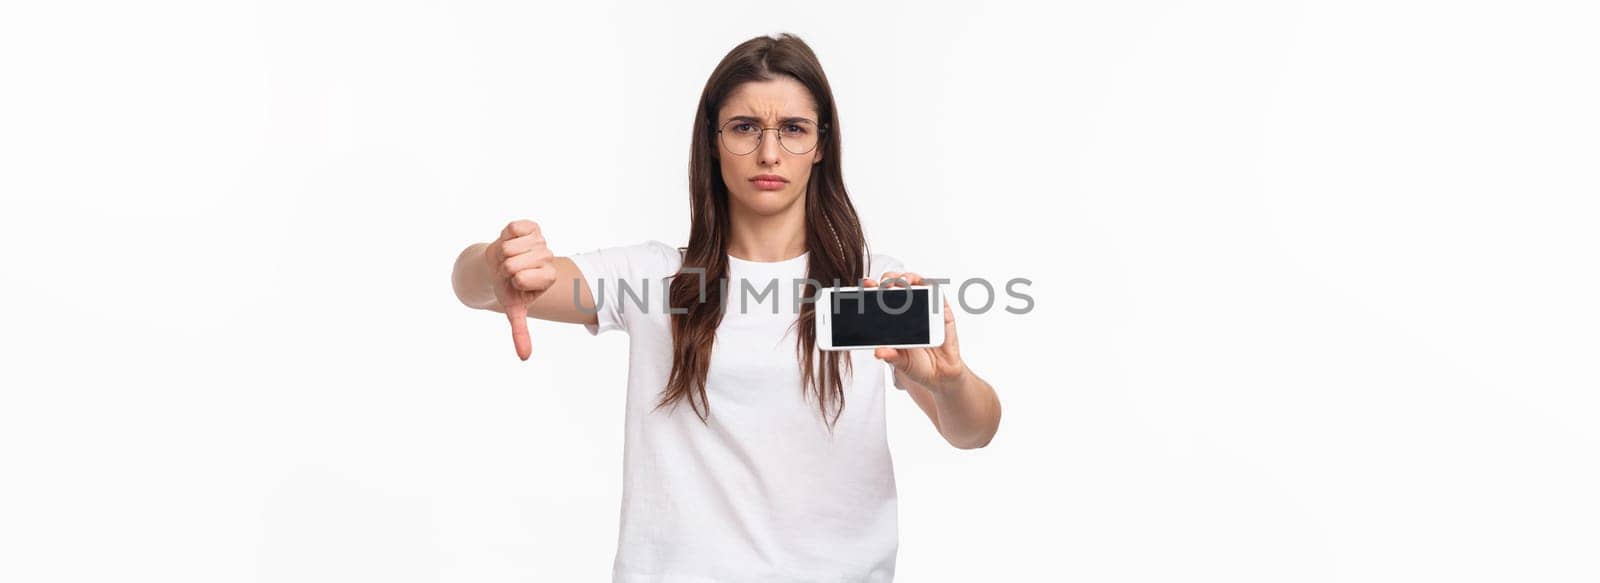 Communication, technology and lifestyle concept. Portrait of upset and disappointed young female rated bad app, showing content on mobile phone, grimacing dislike, show thumbs-down disapproval.